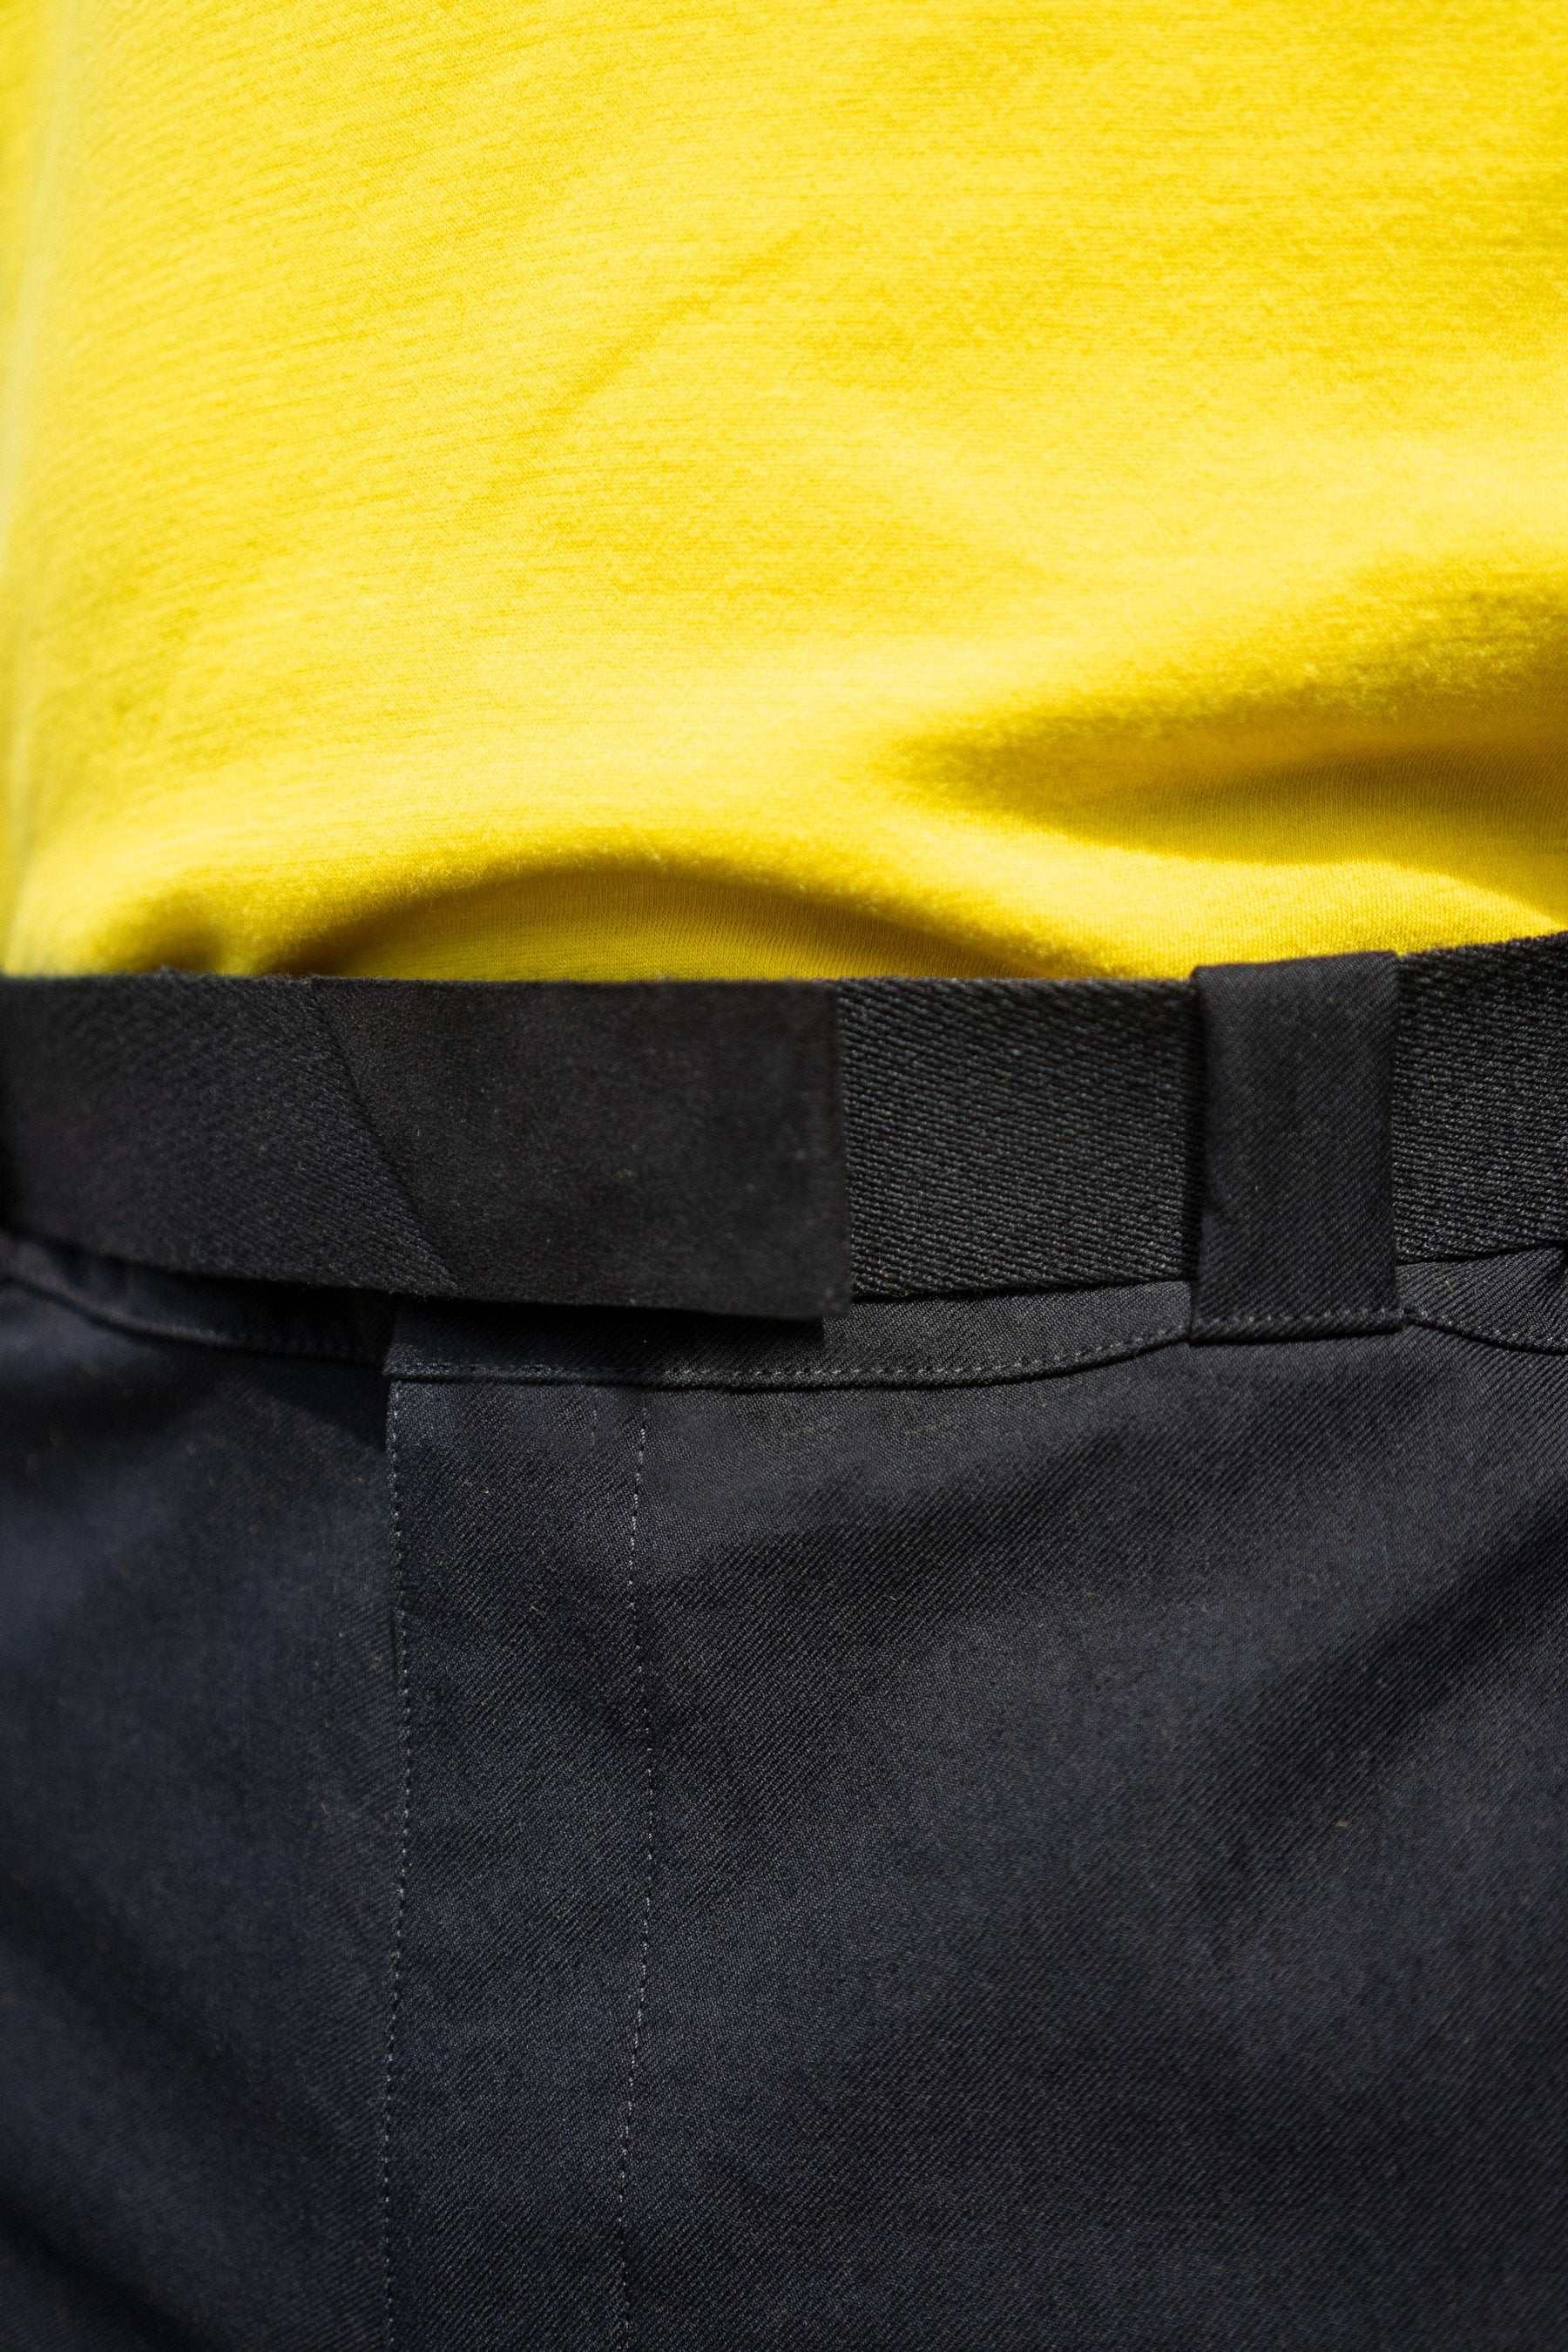 Close crop of the Experiment 242 - Polyamour Precision Belt with the Cottonweight Cut One T-shirt in Yellow and the Bombpaints in Black